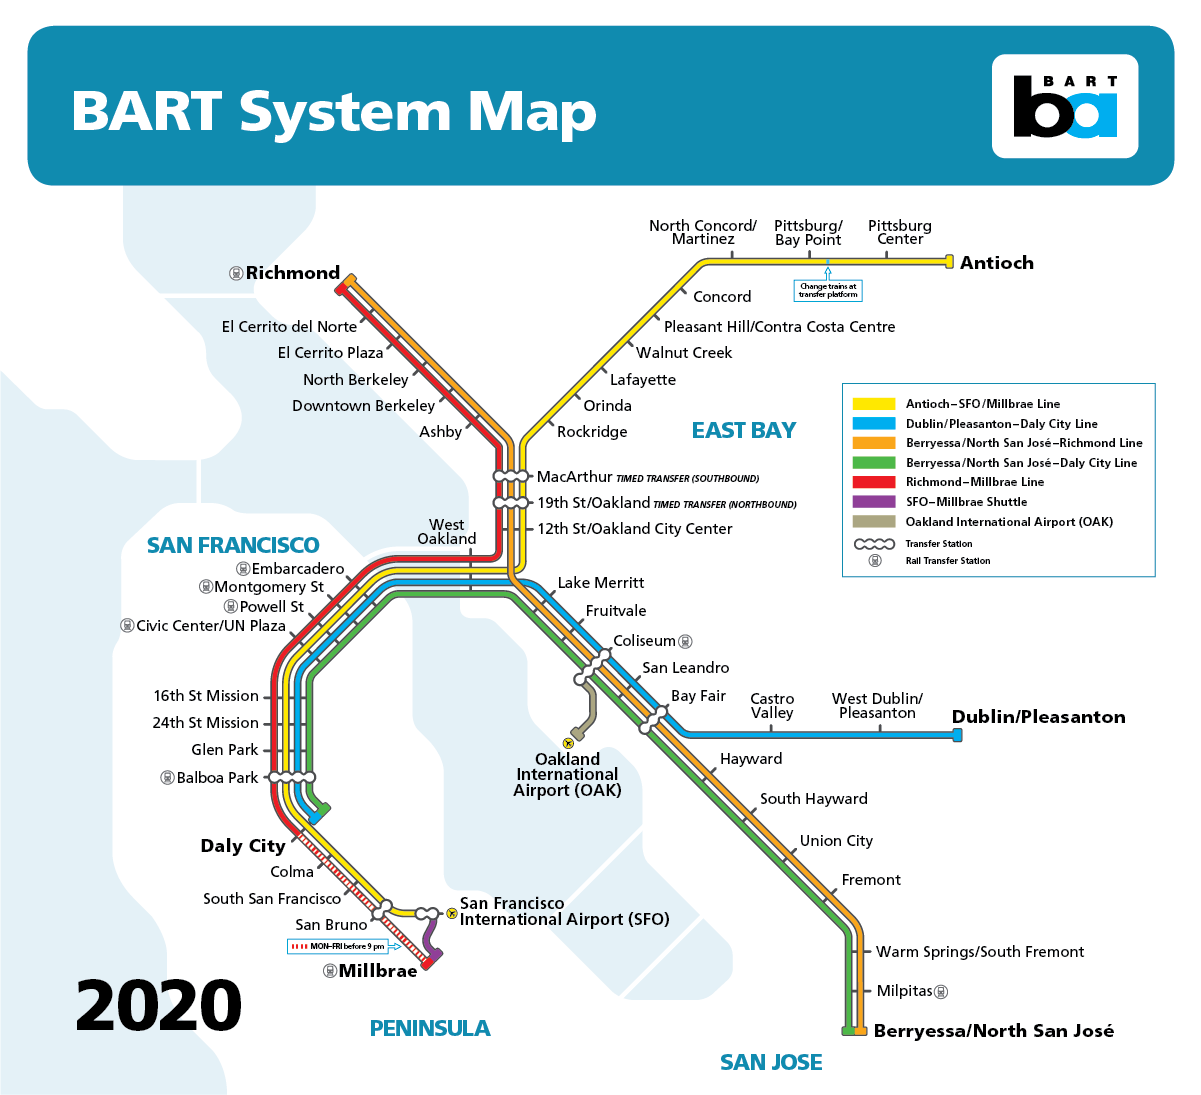 BART map from 2020